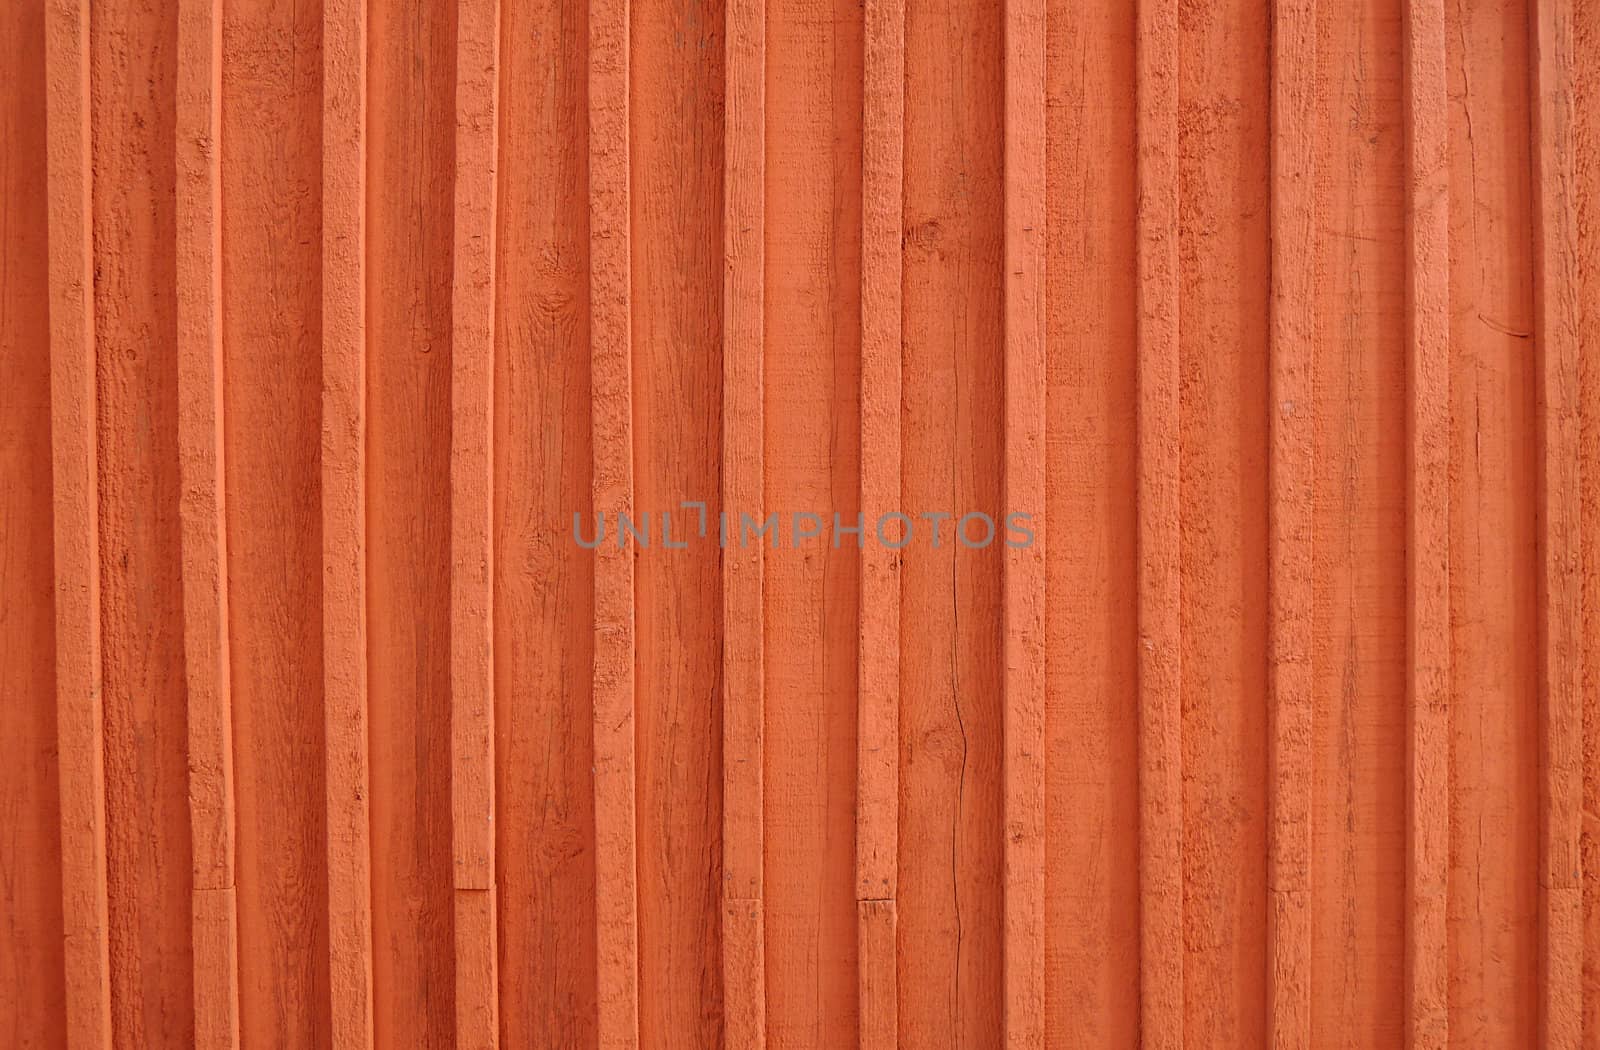 Background image of a wooden wall painted in bright red color